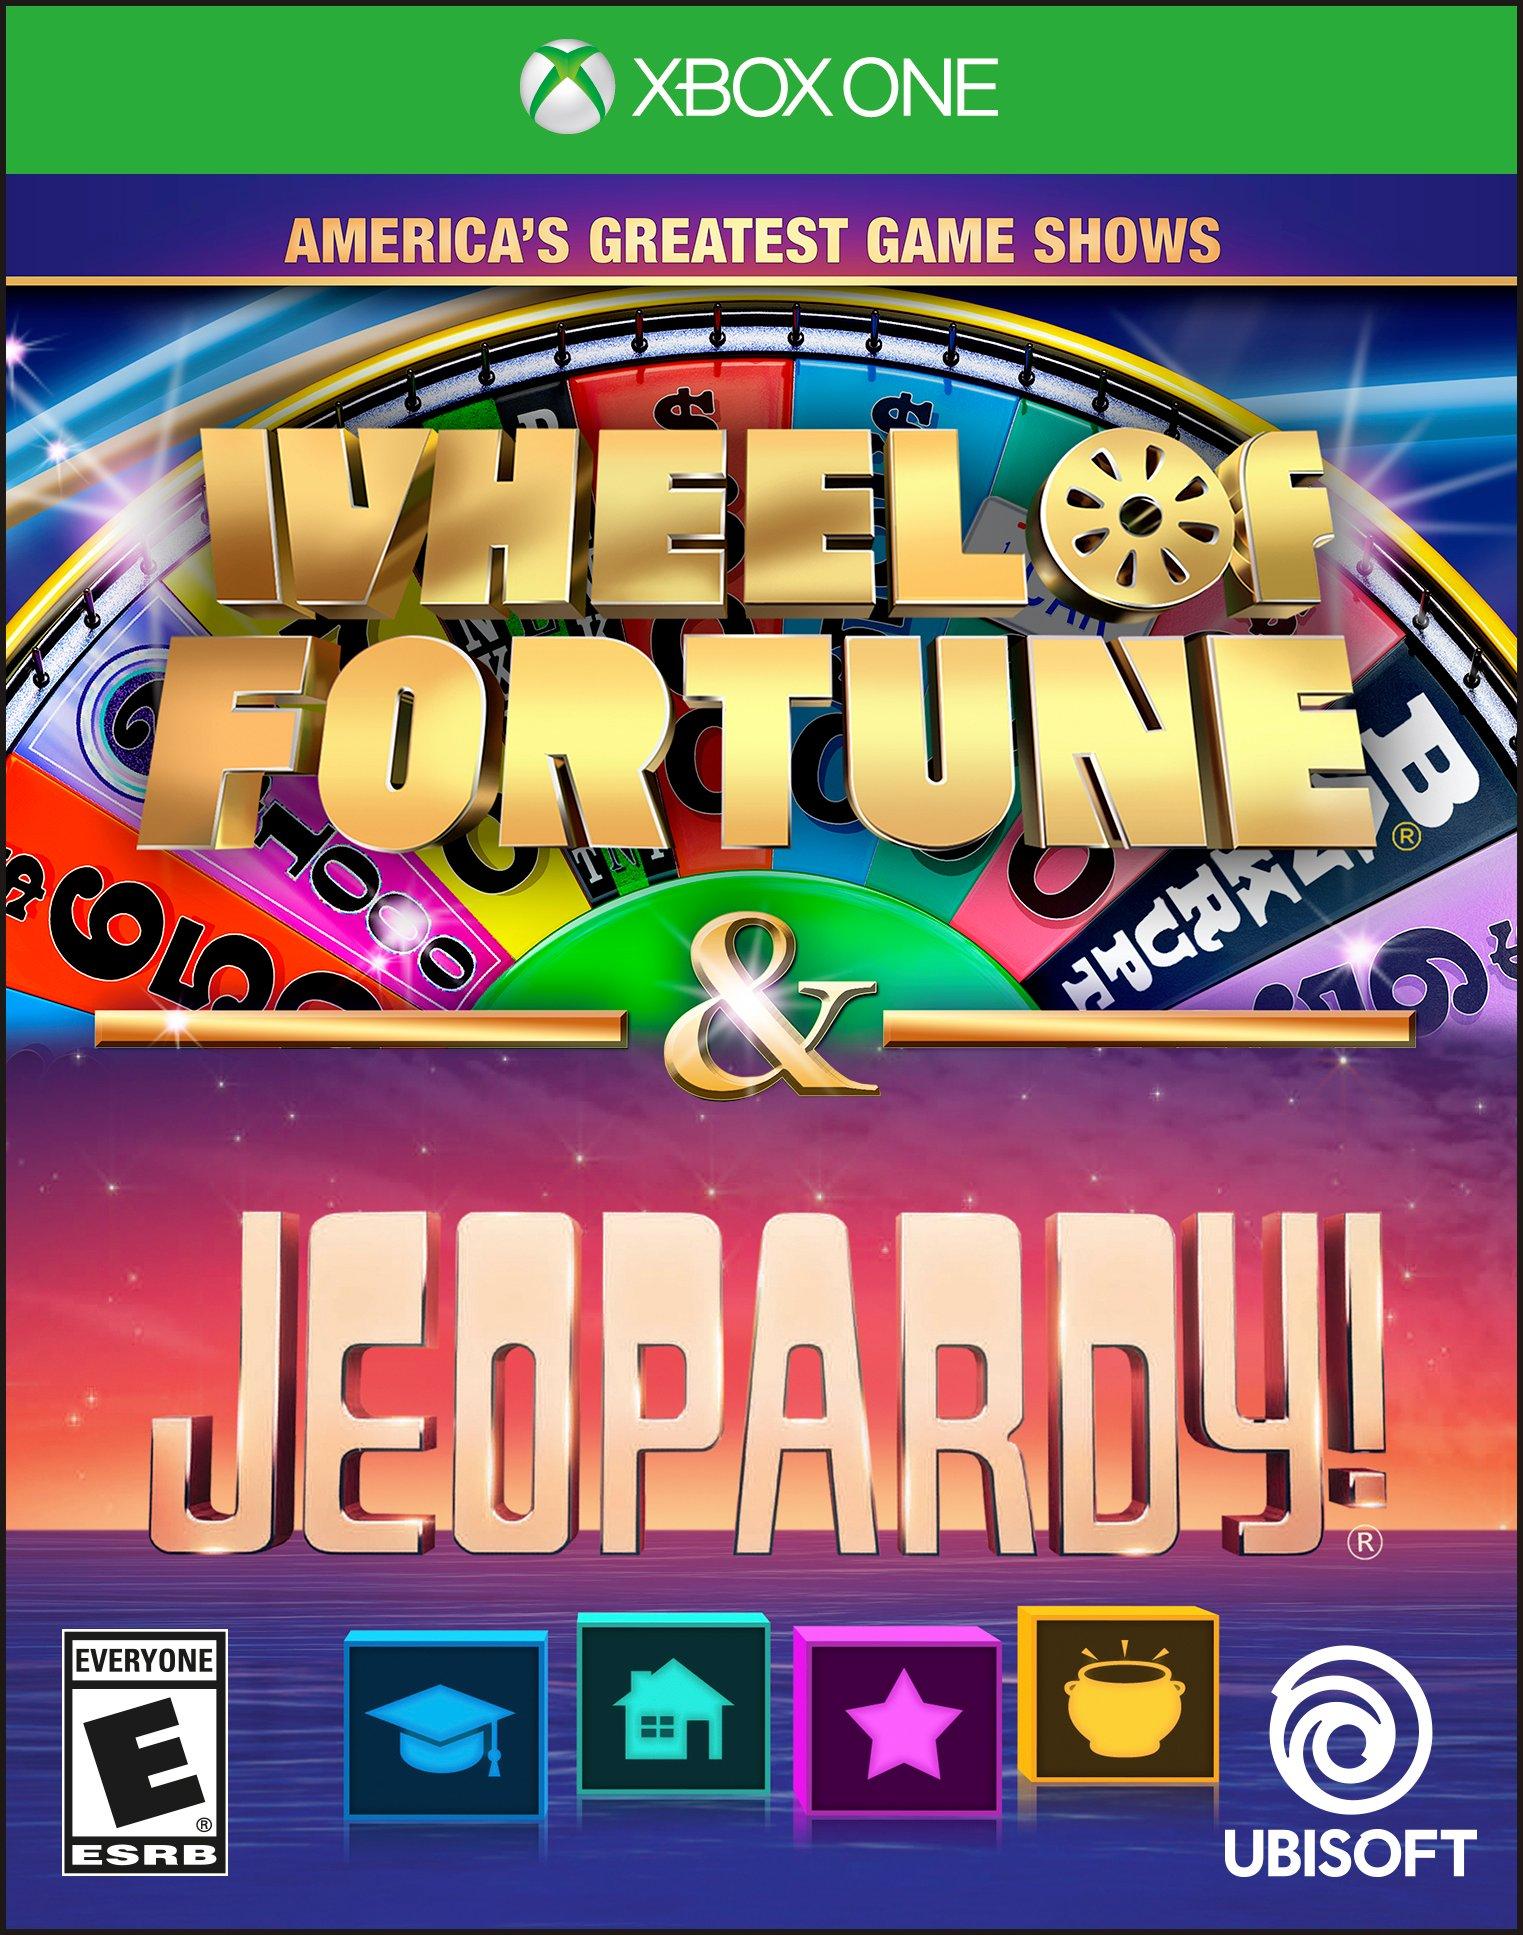 America's Greatest Game Shows: Wheel of Fortune and Jeopardy